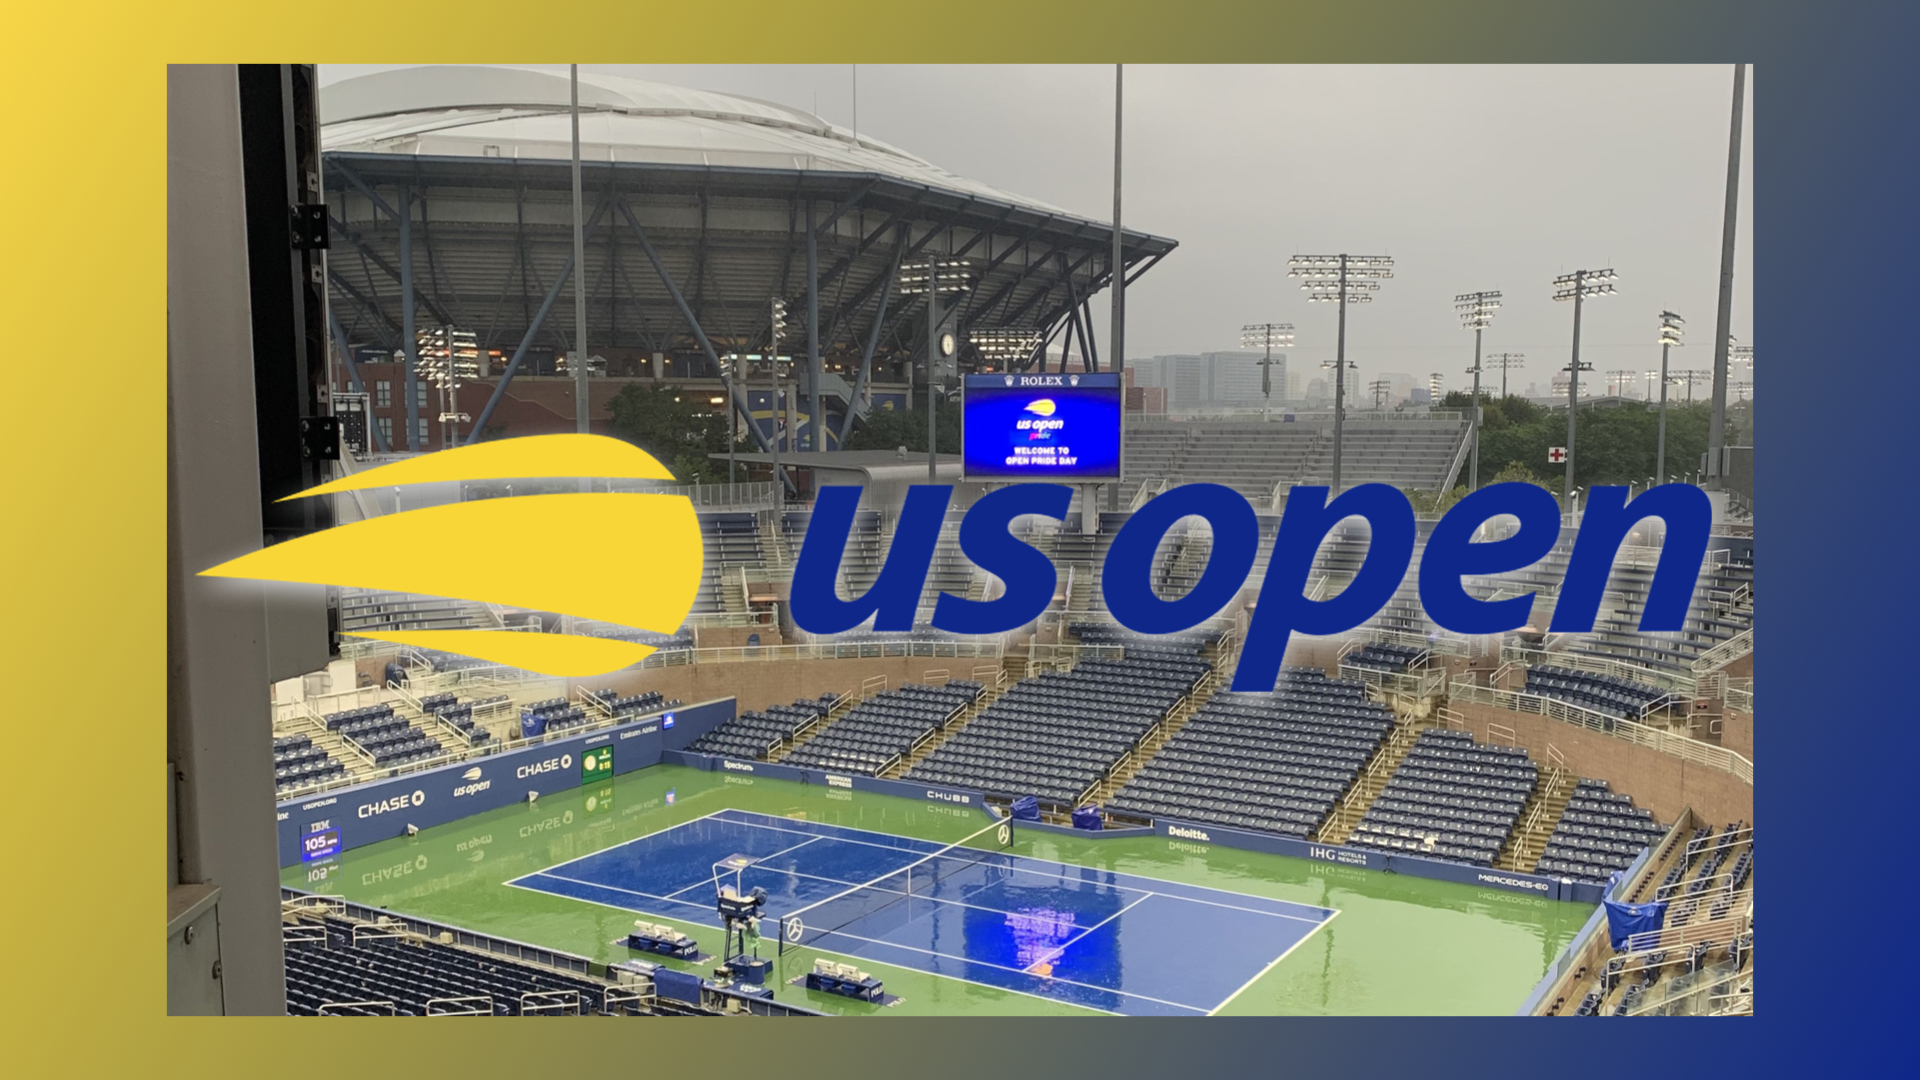 The 2023 US Open took place August 28-September 10, at the Billie Jean King National Tennis Center.